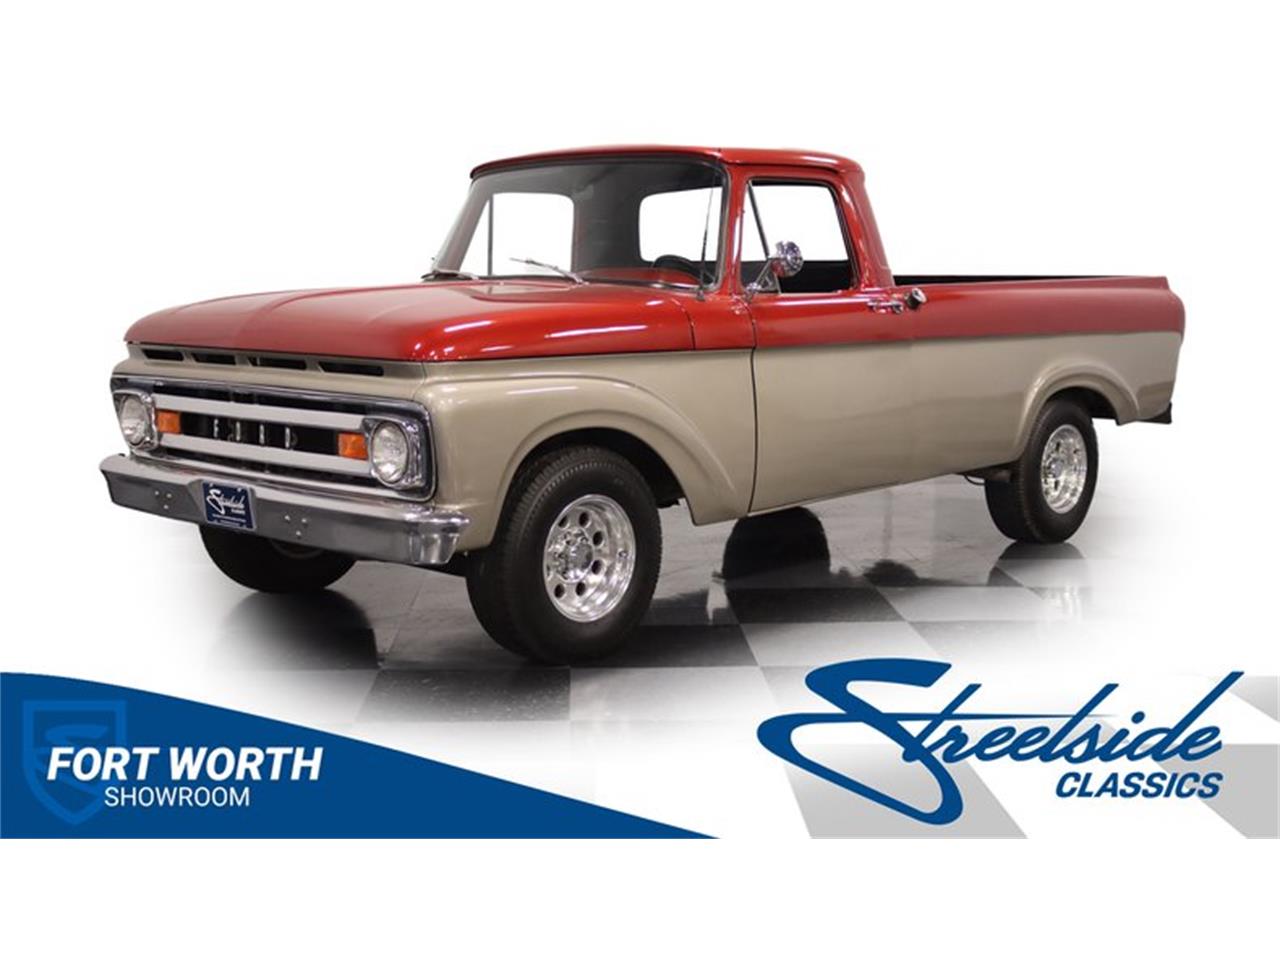 For Sale: 1962 Ford F100 in Ft Worth, Texas for sale in Fort Worth, TX